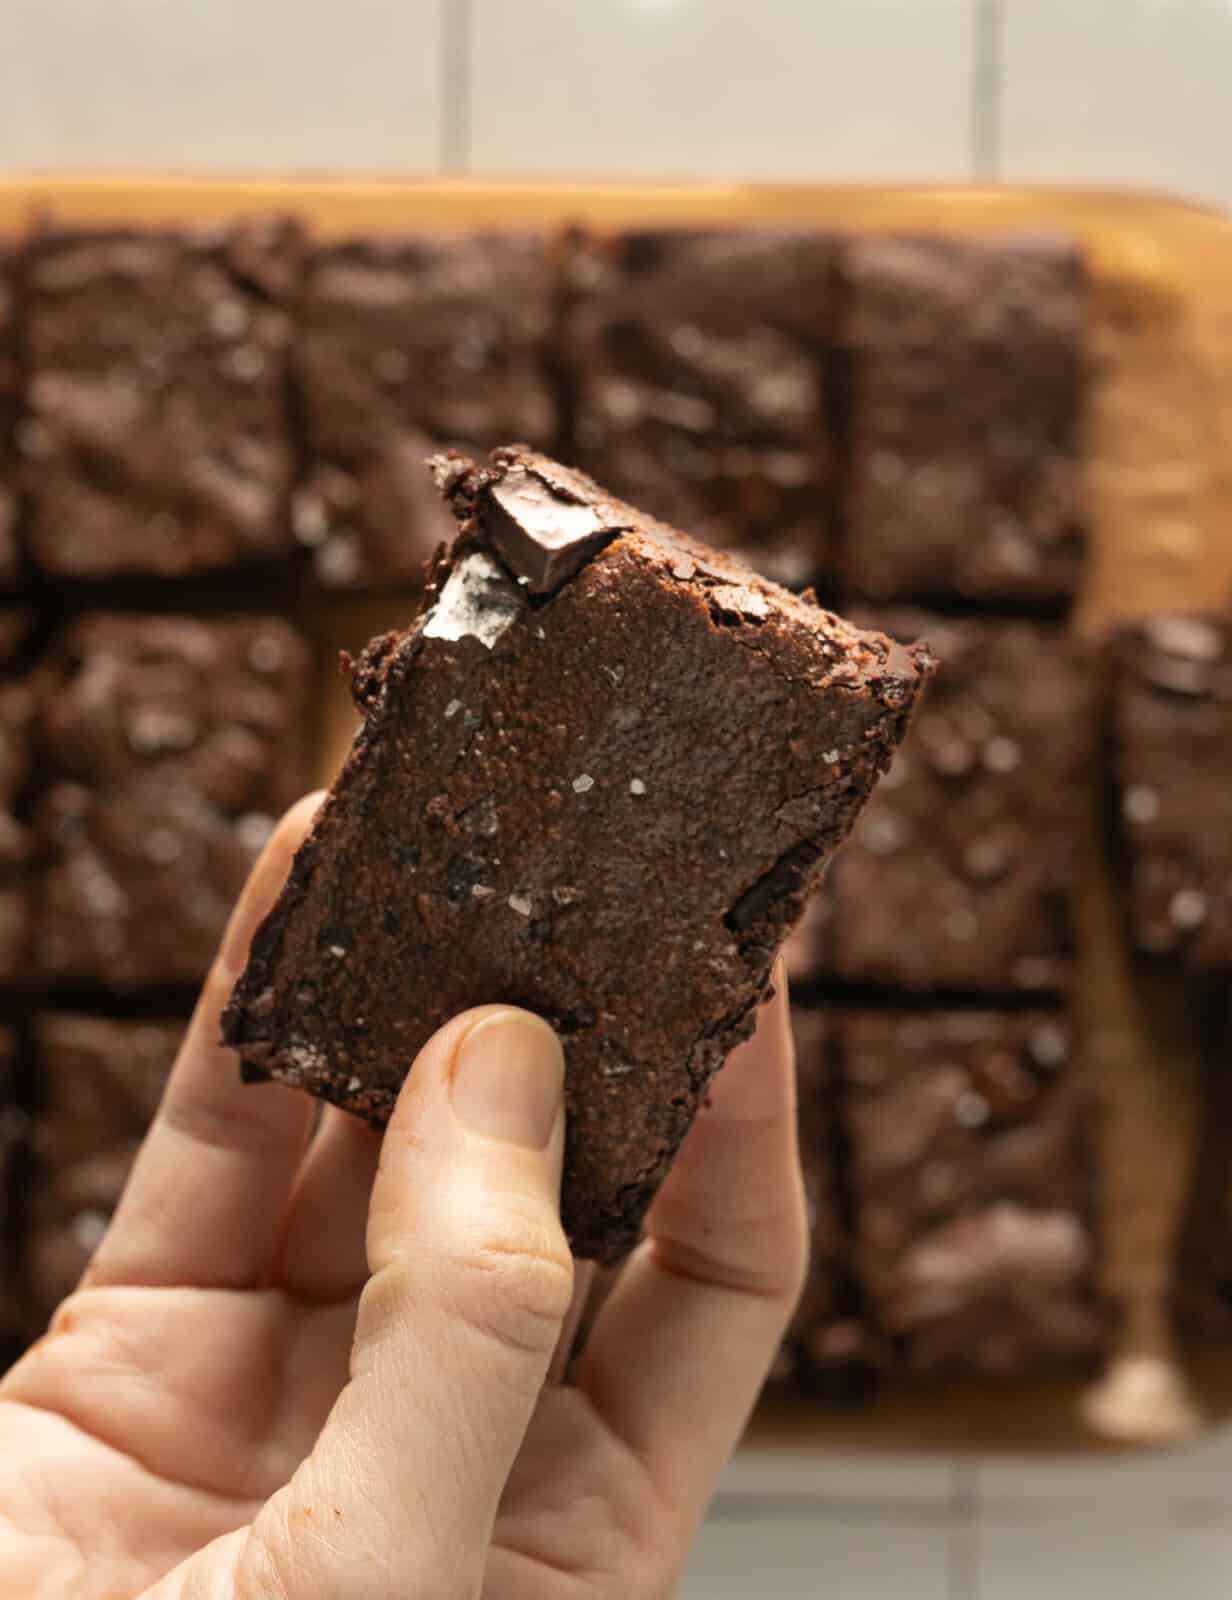 Someone is holding a brownie over the tray of cut brownies just before a bite is taken out of gluten free chocolate chunk brownies.